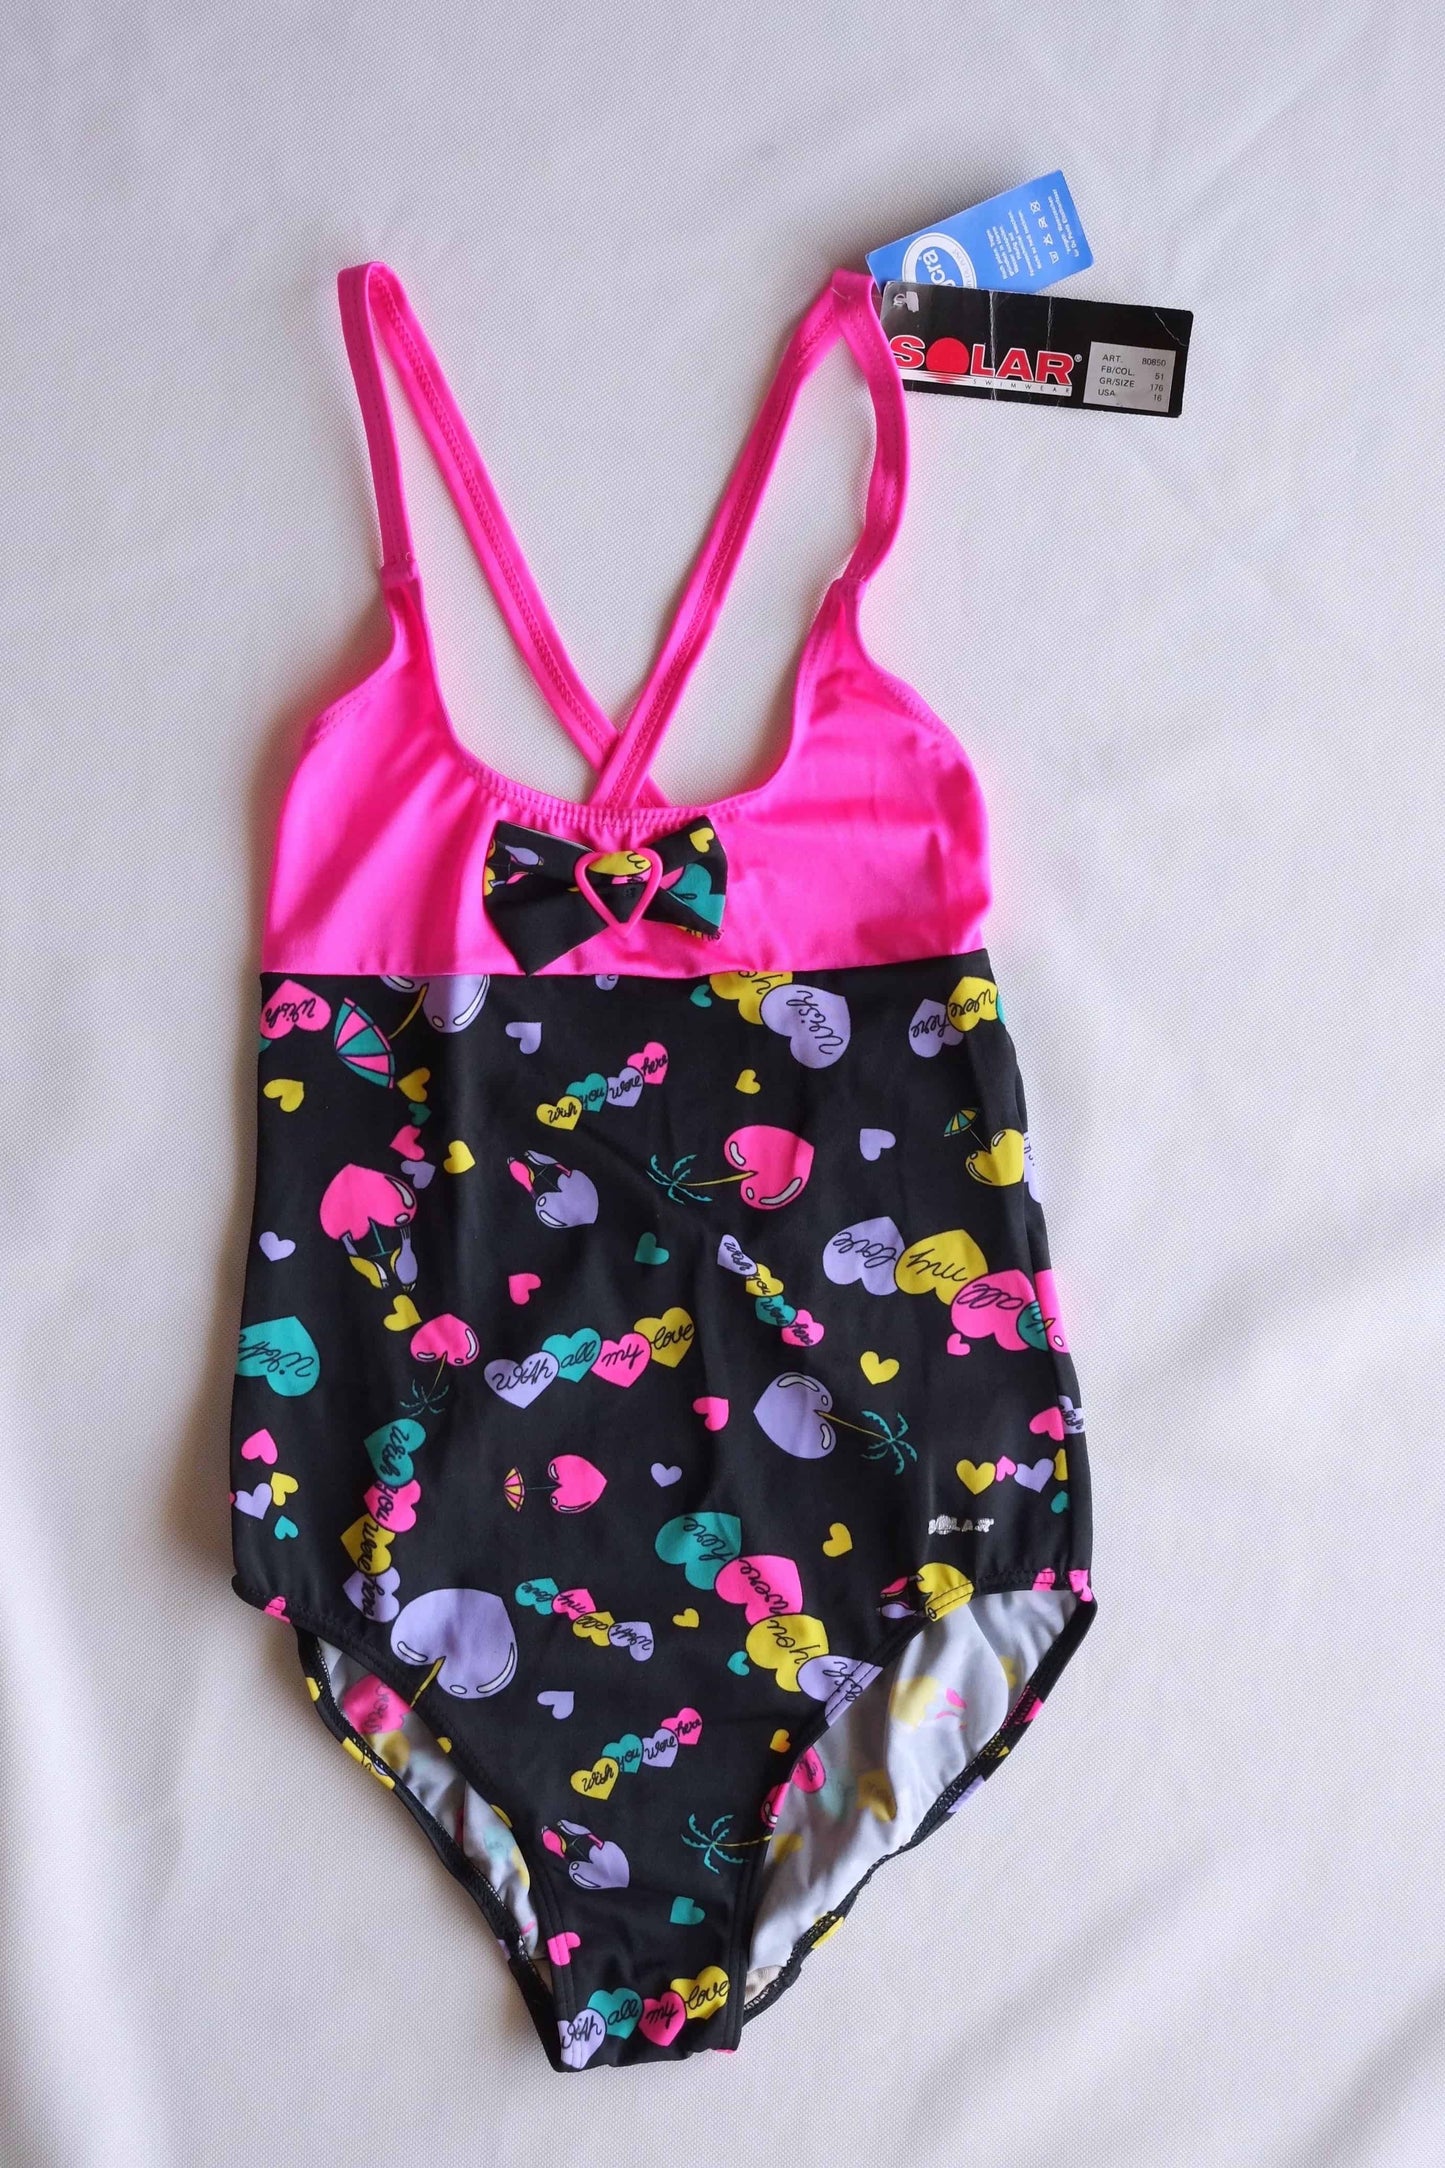 SOLAR 80's Hearts Girls Swimsuit BLACK AND PINK